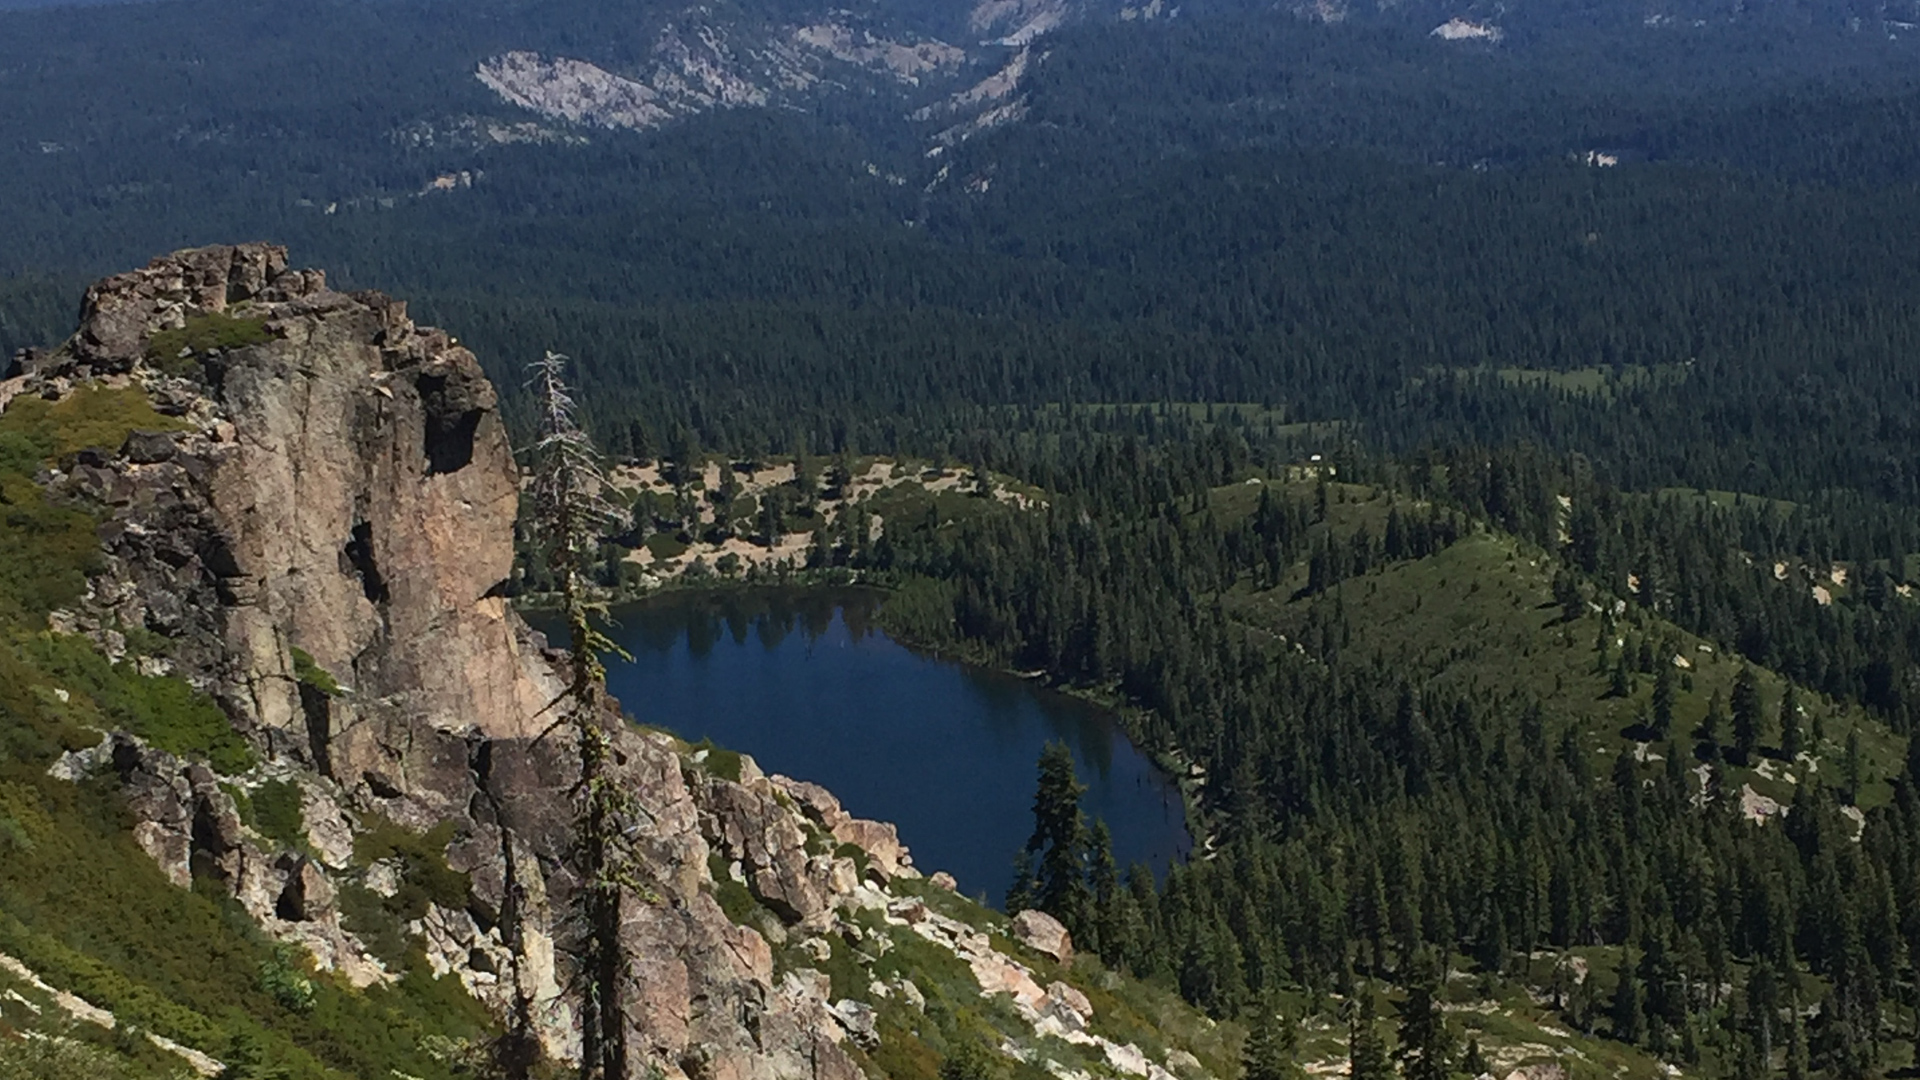 5 great hikes in the Lost Sierra (Sponsored) - SFGate1920 x 1080